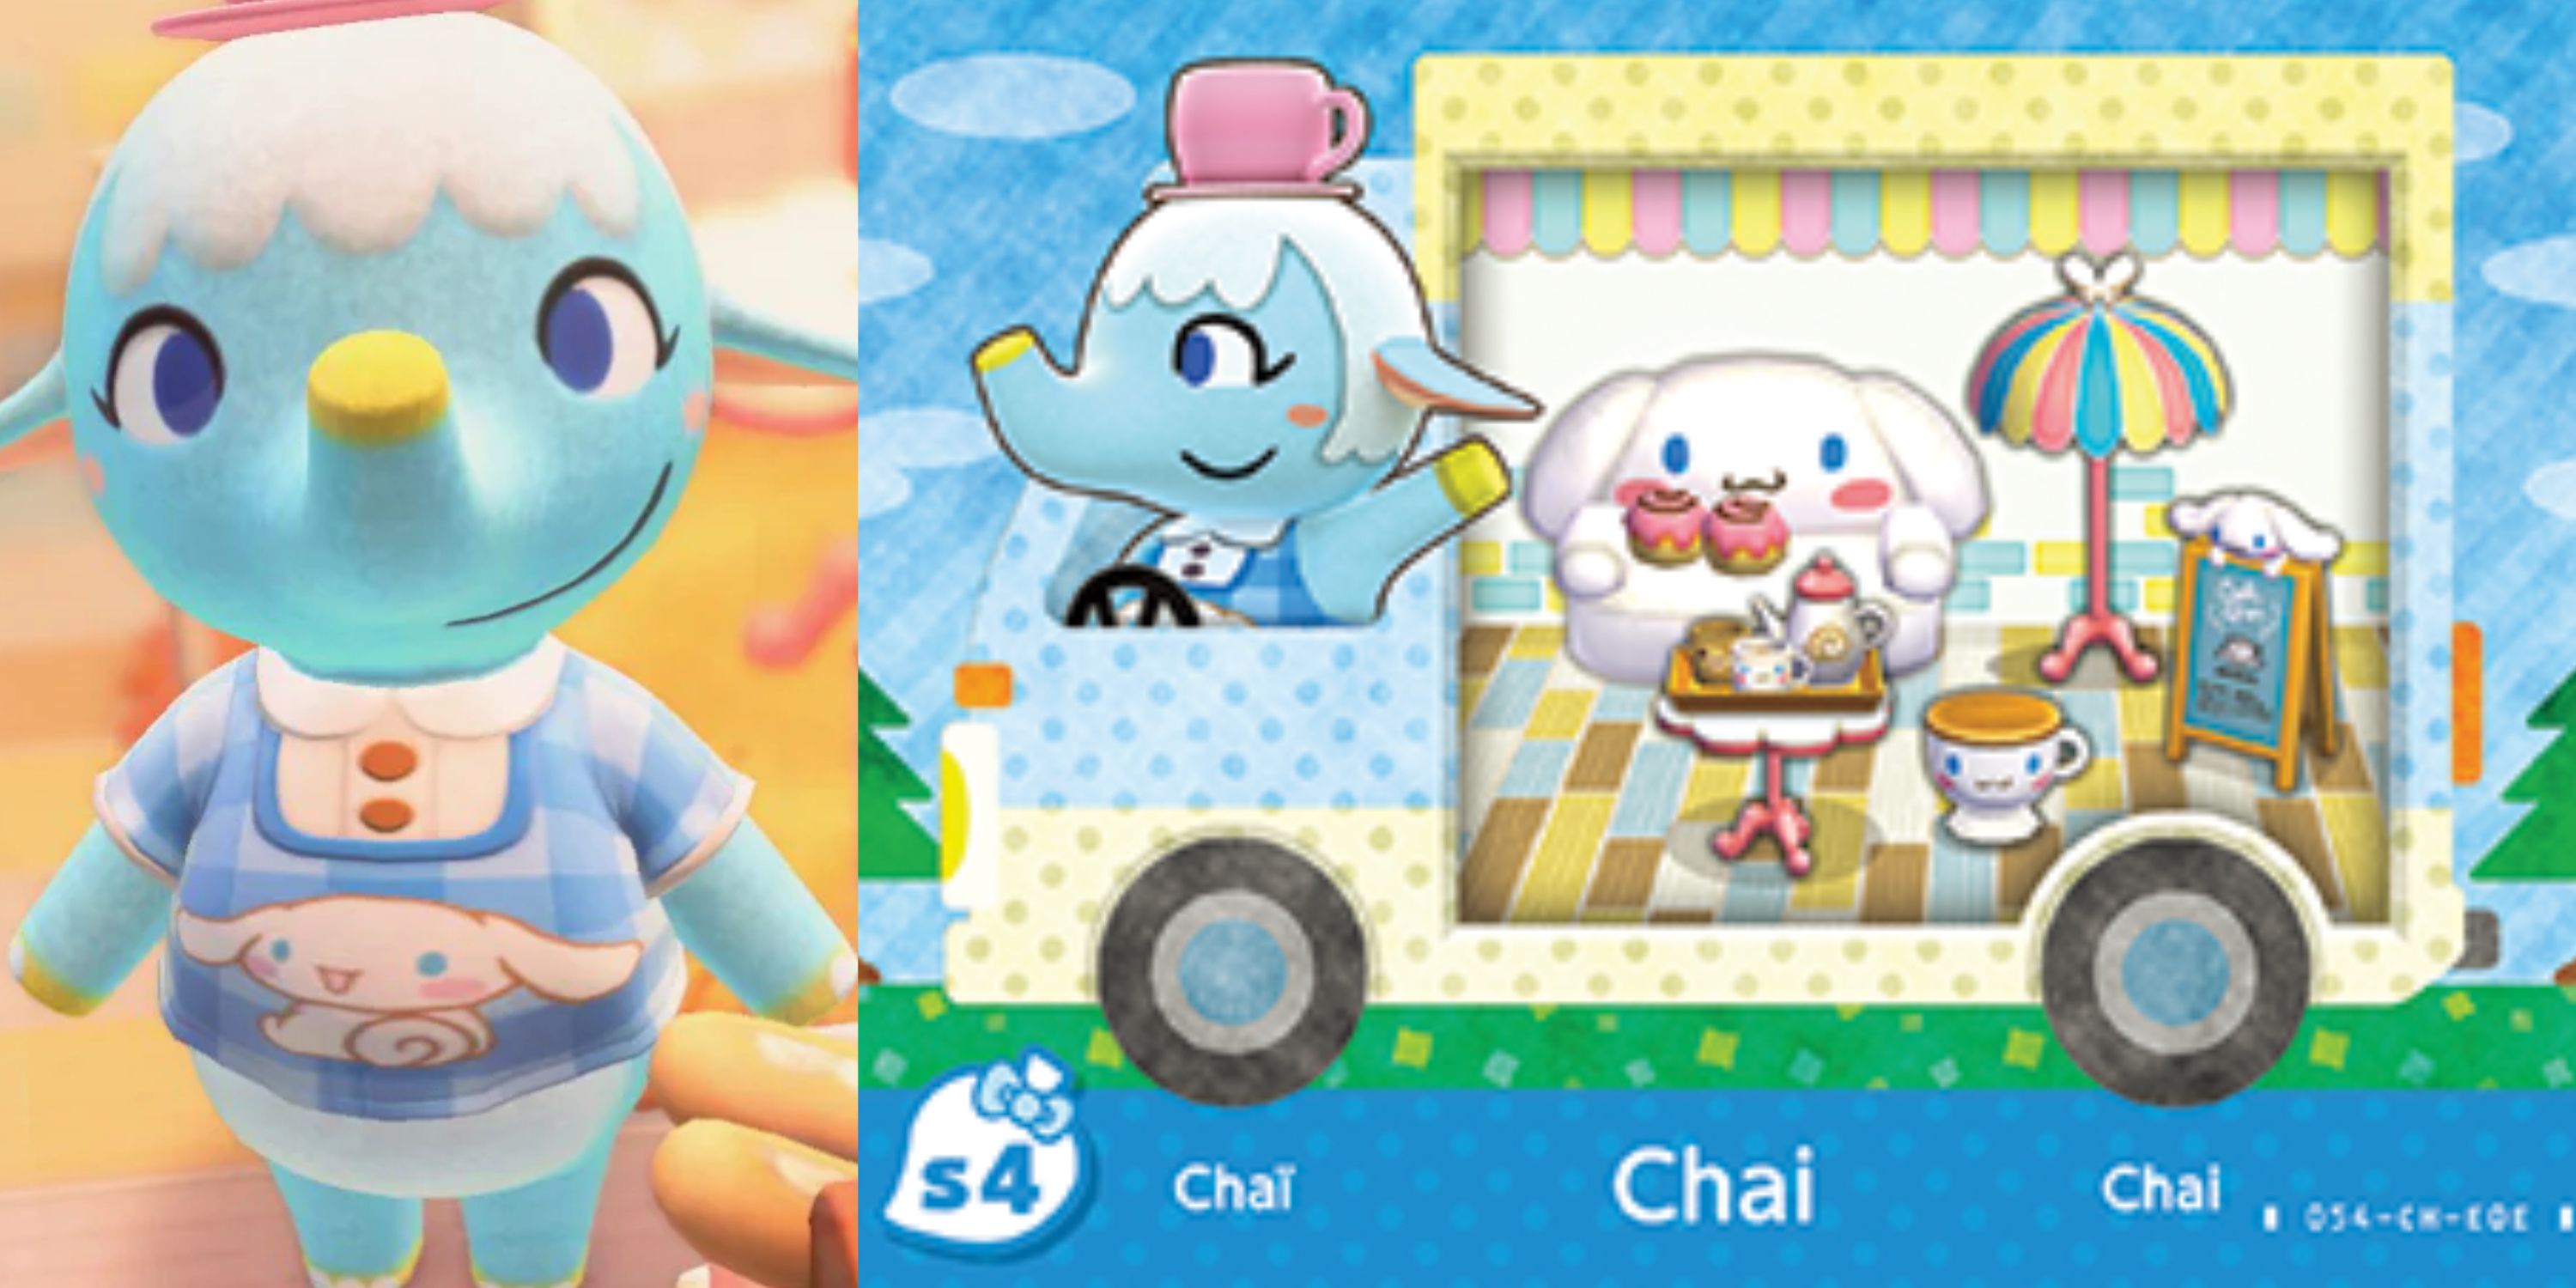 Chai is a Cinnamoroll inspired Elephant villager